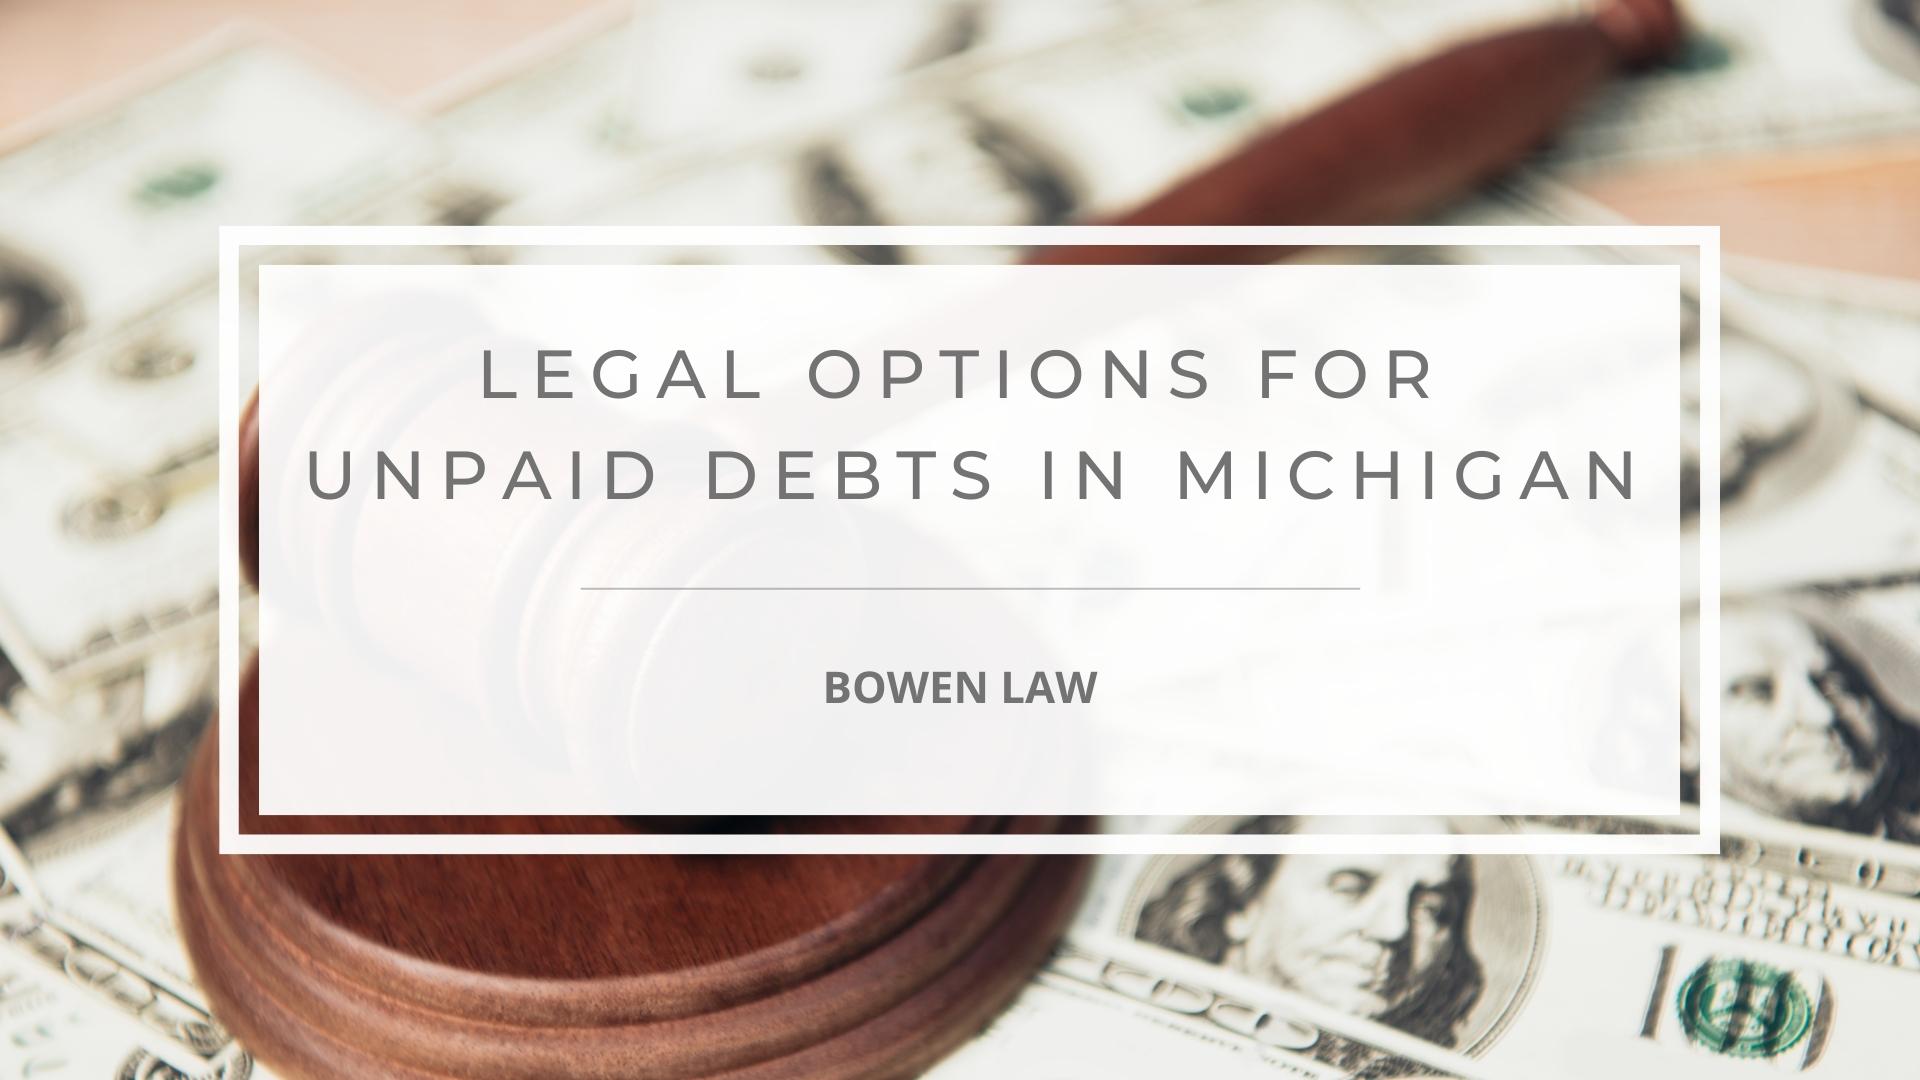 Featured image of legal options for unpaid debts in michigan